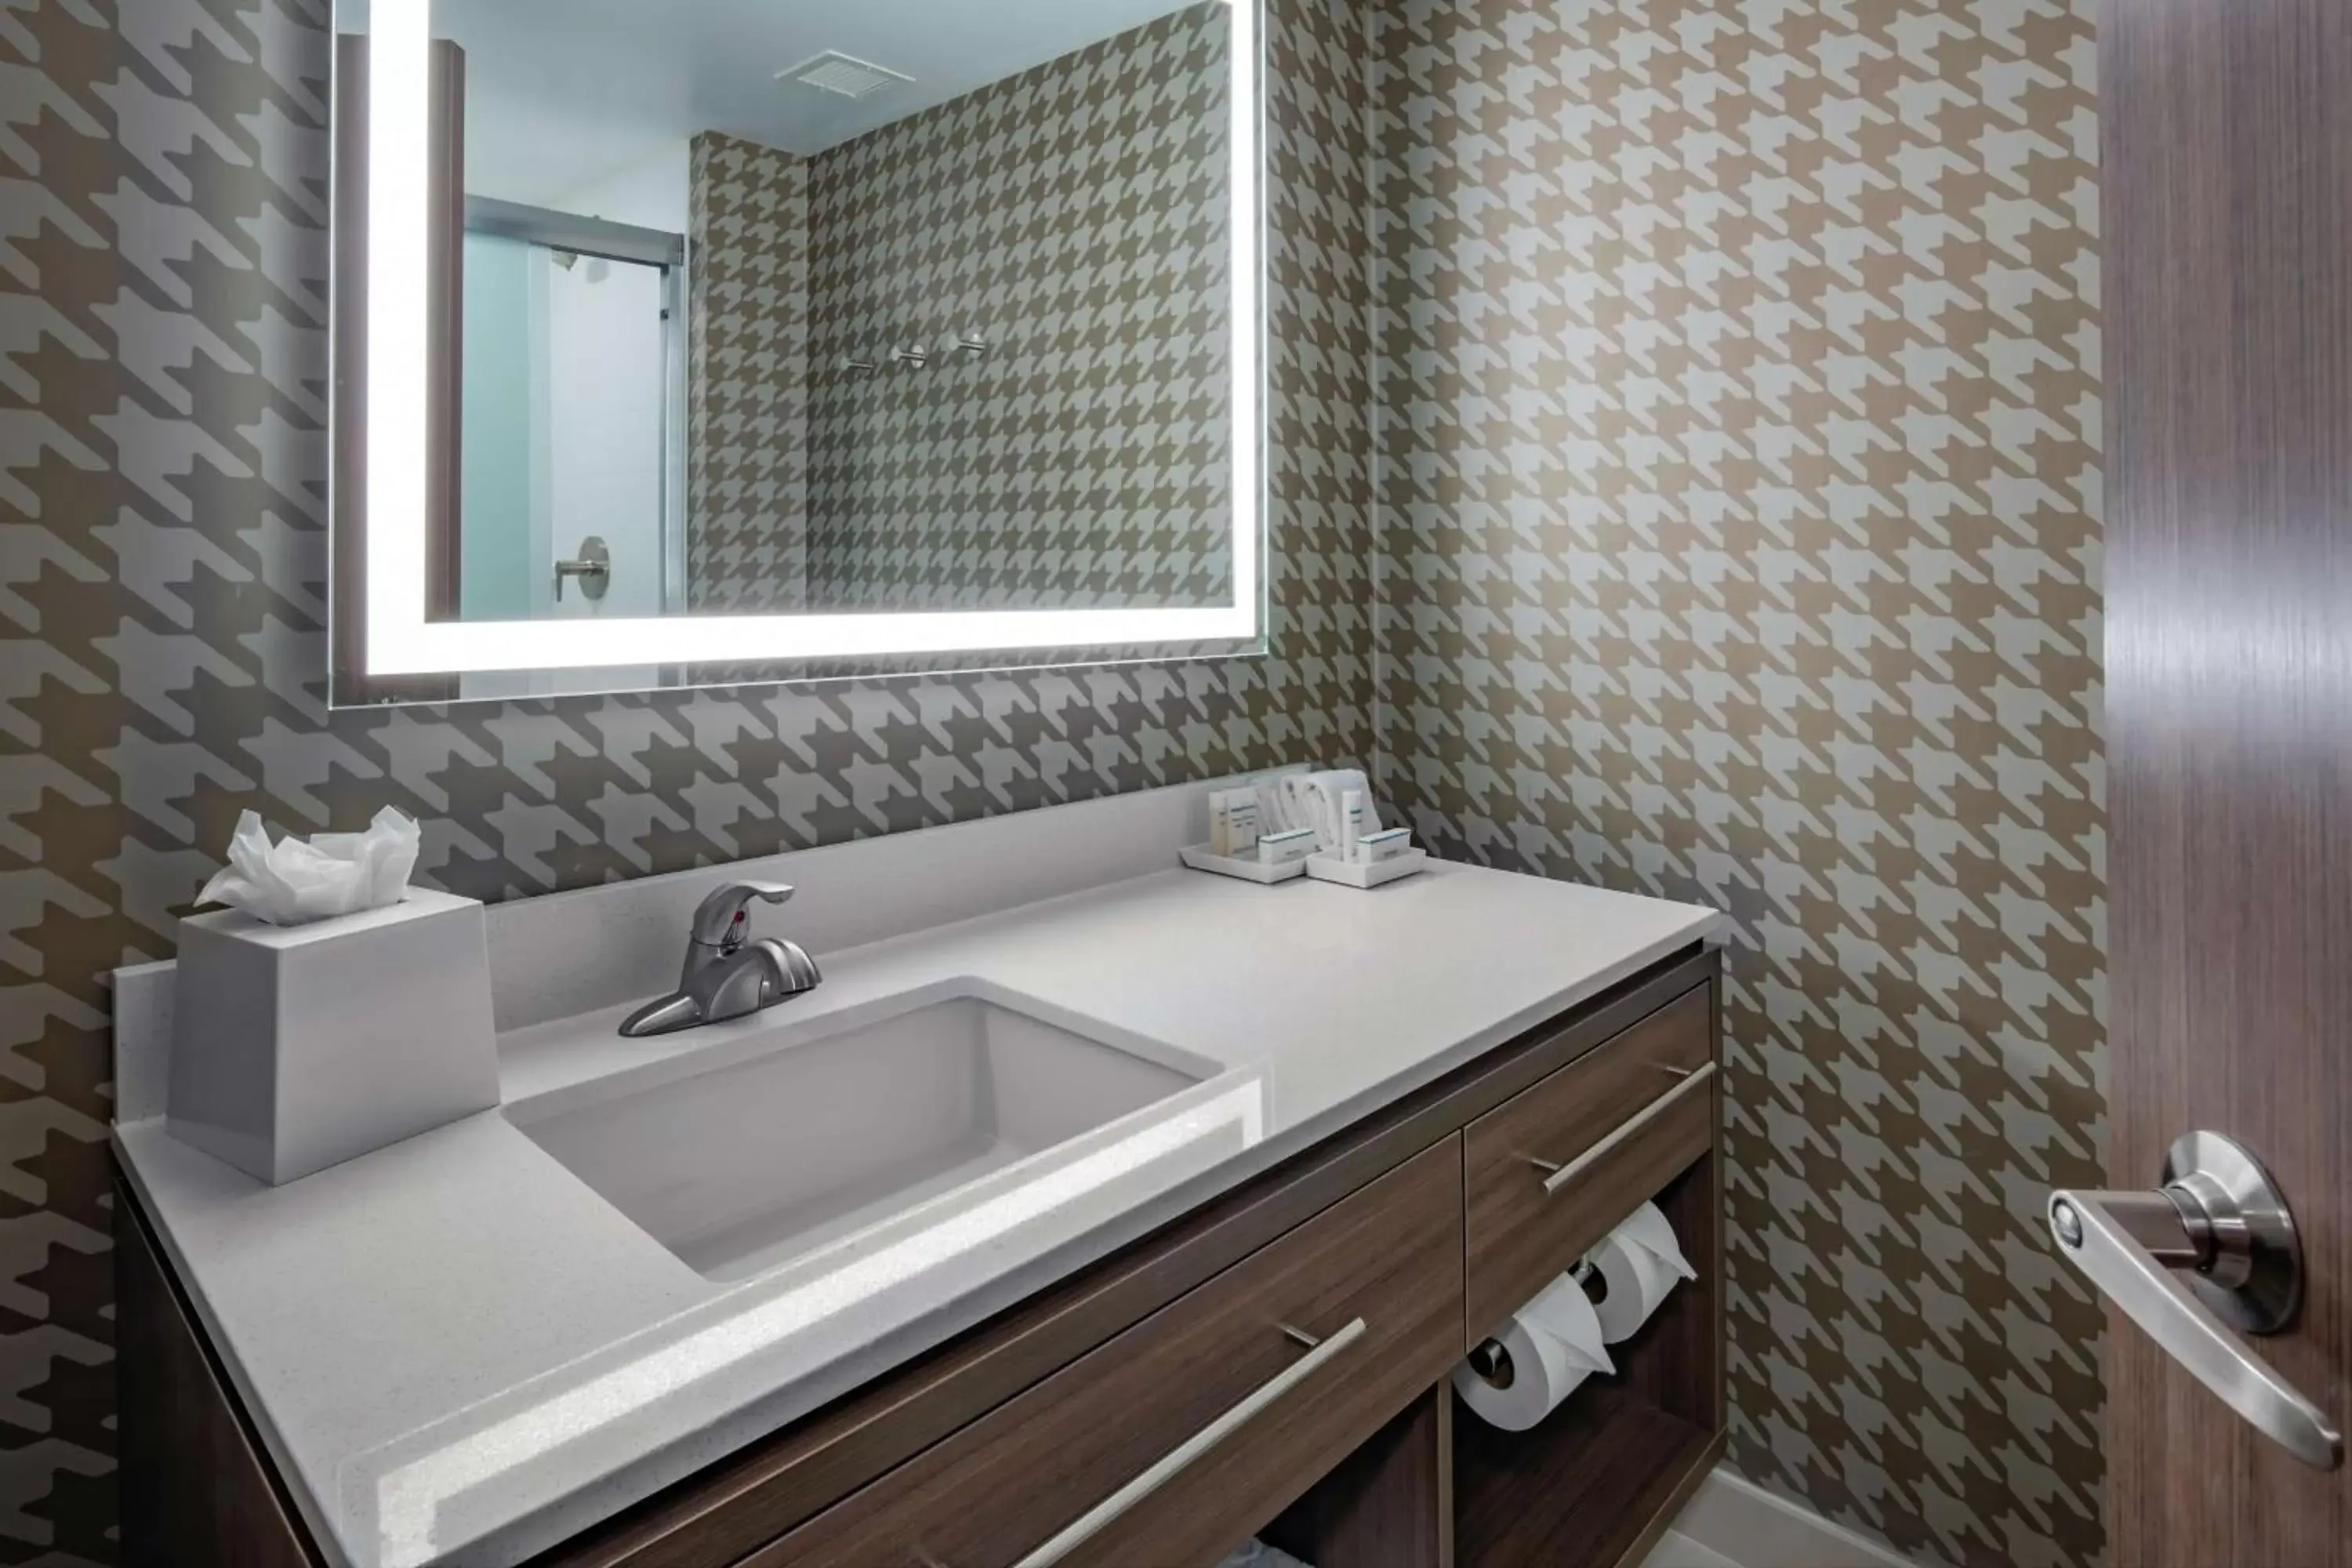 Bathroom in Home2 Suites by Hilton Omaha I-80 at 72nd Street, NE